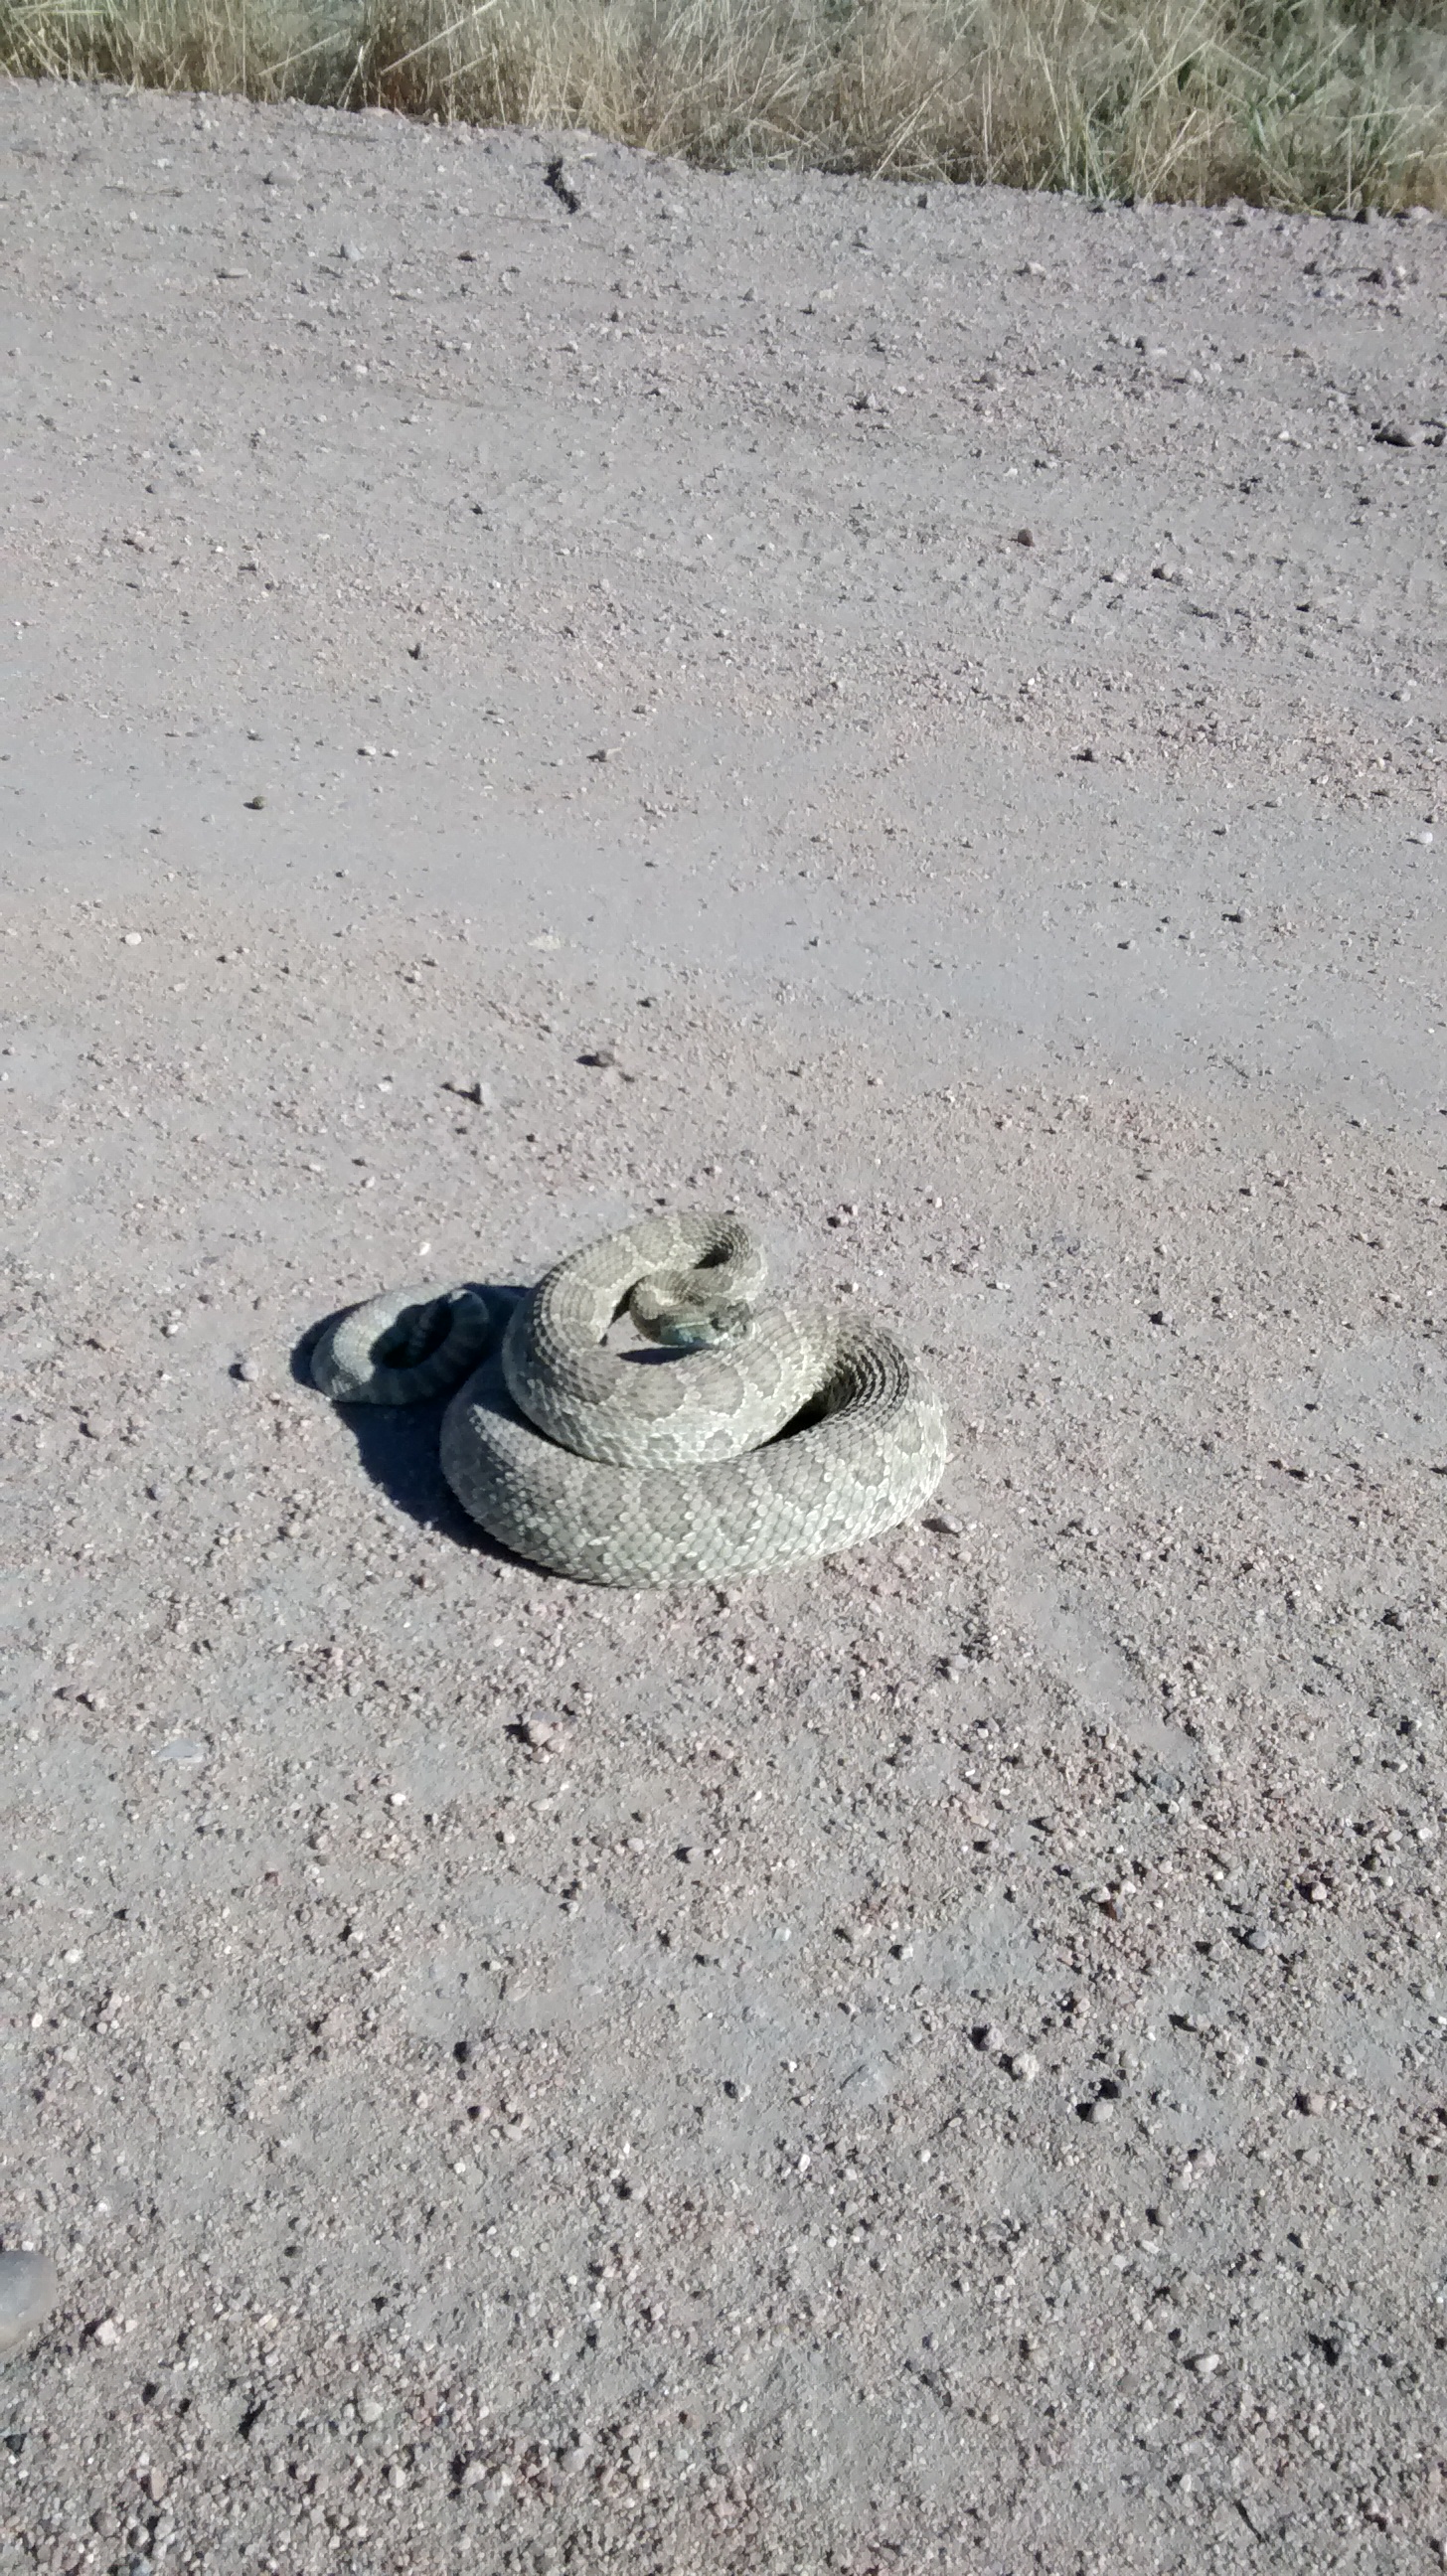 Greetings from the cattle pasture Mr. Rattlesnake :P